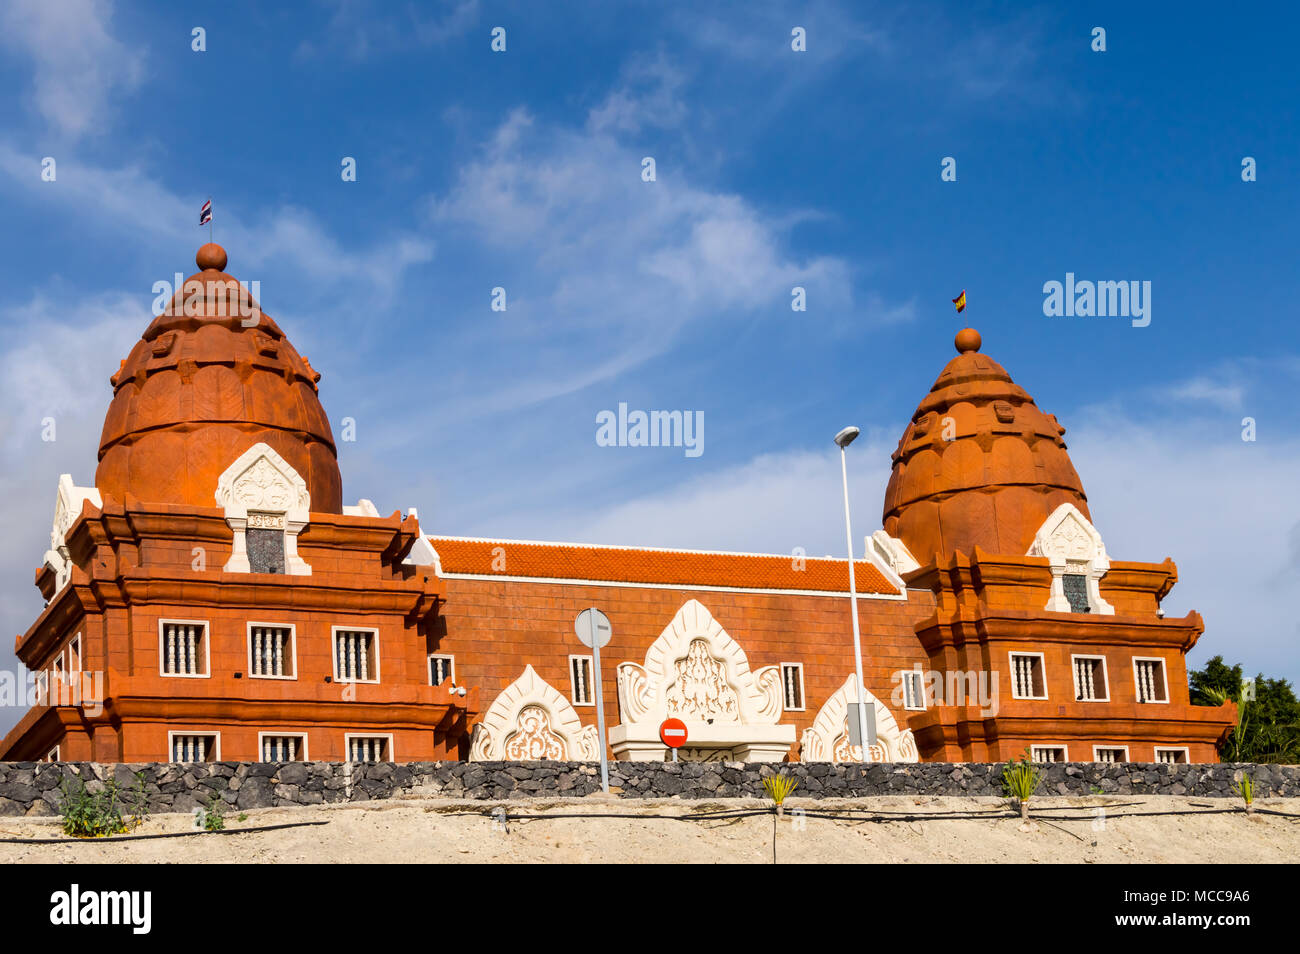 Thai-inspired architecture building with two domes on the island of Tenerife in SPAIN Stock Photo